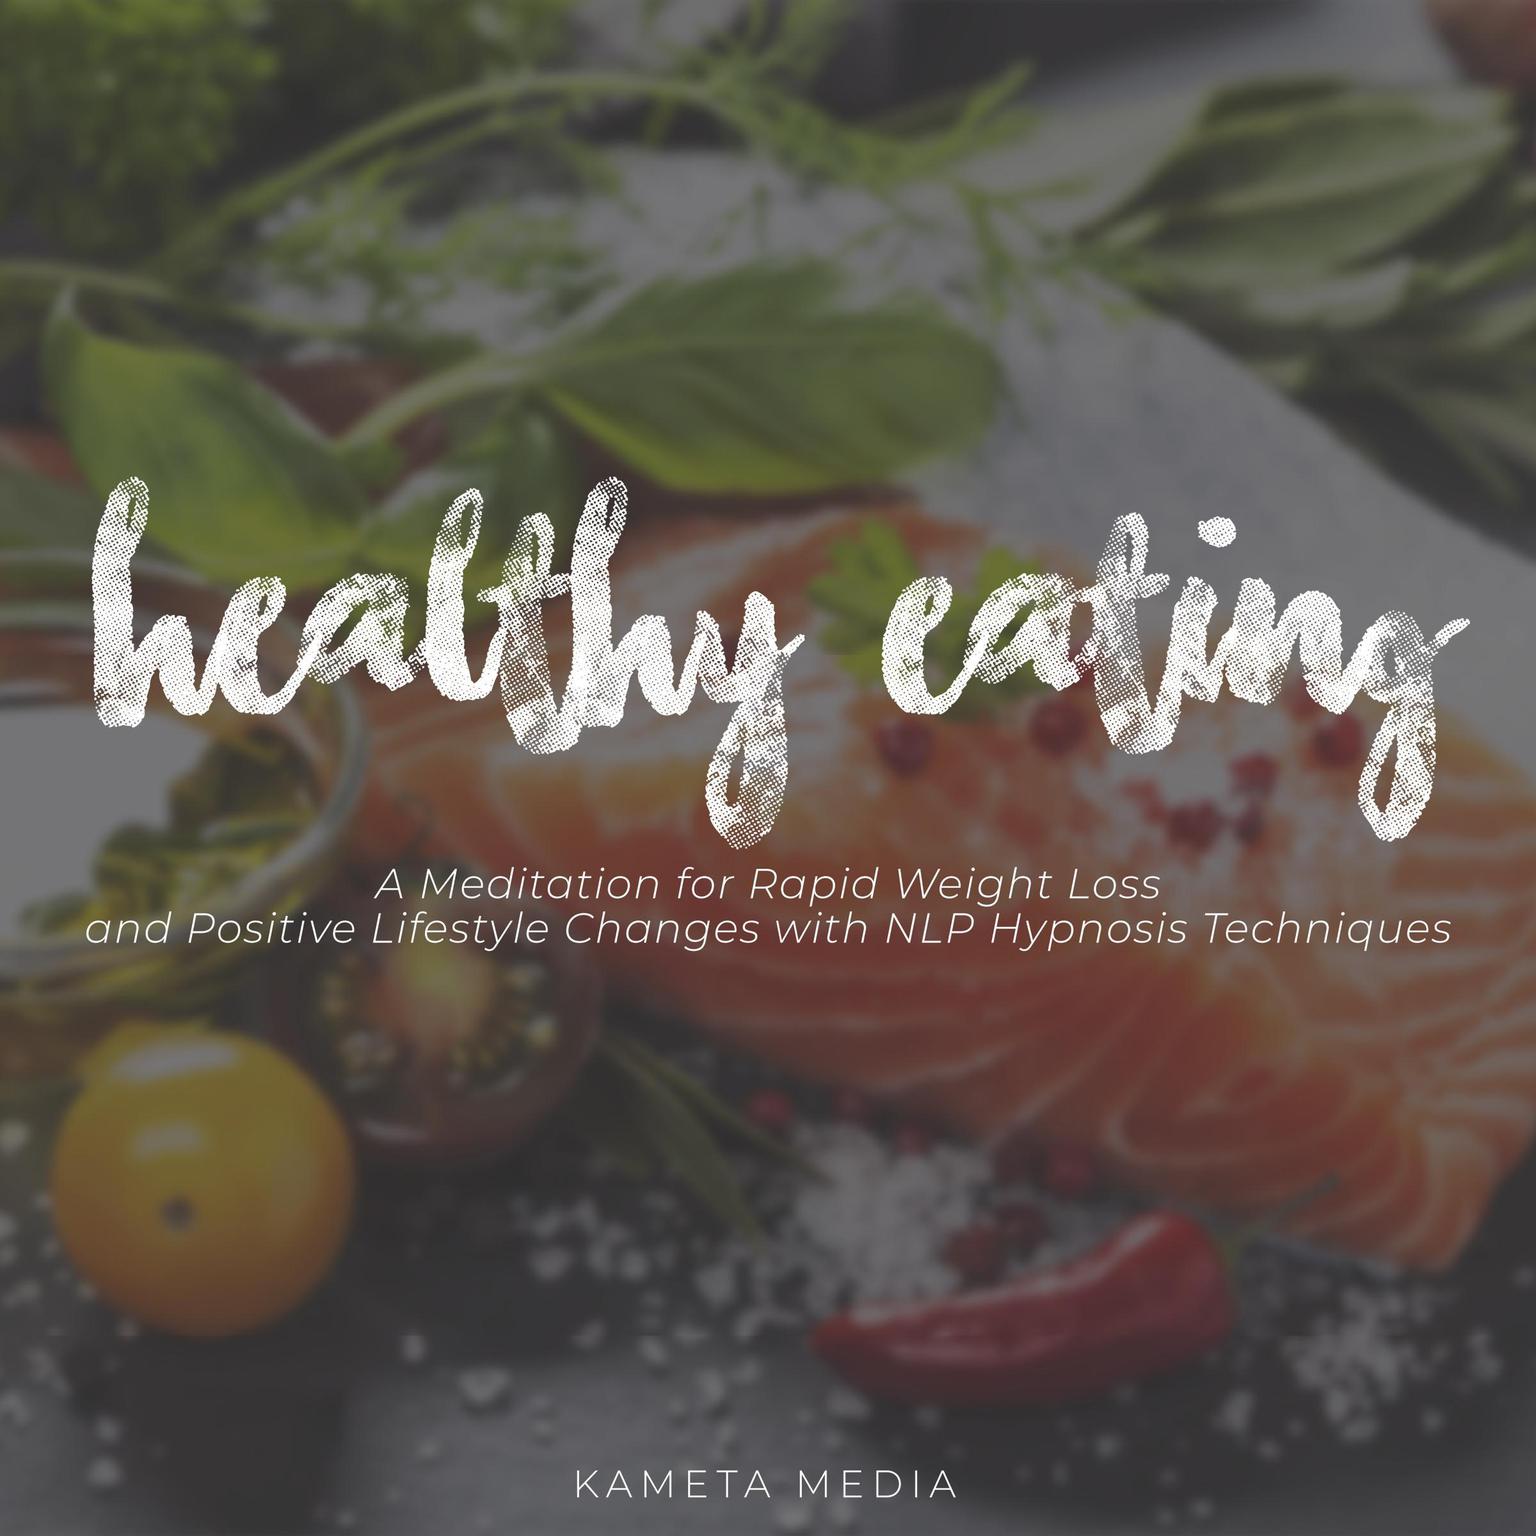 Healthy Eating: A Meditation for Rapid Weight Loss and Positive Lifestyle Changes with NLP Hypnosis Techniques Audiobook, by Kameta Media